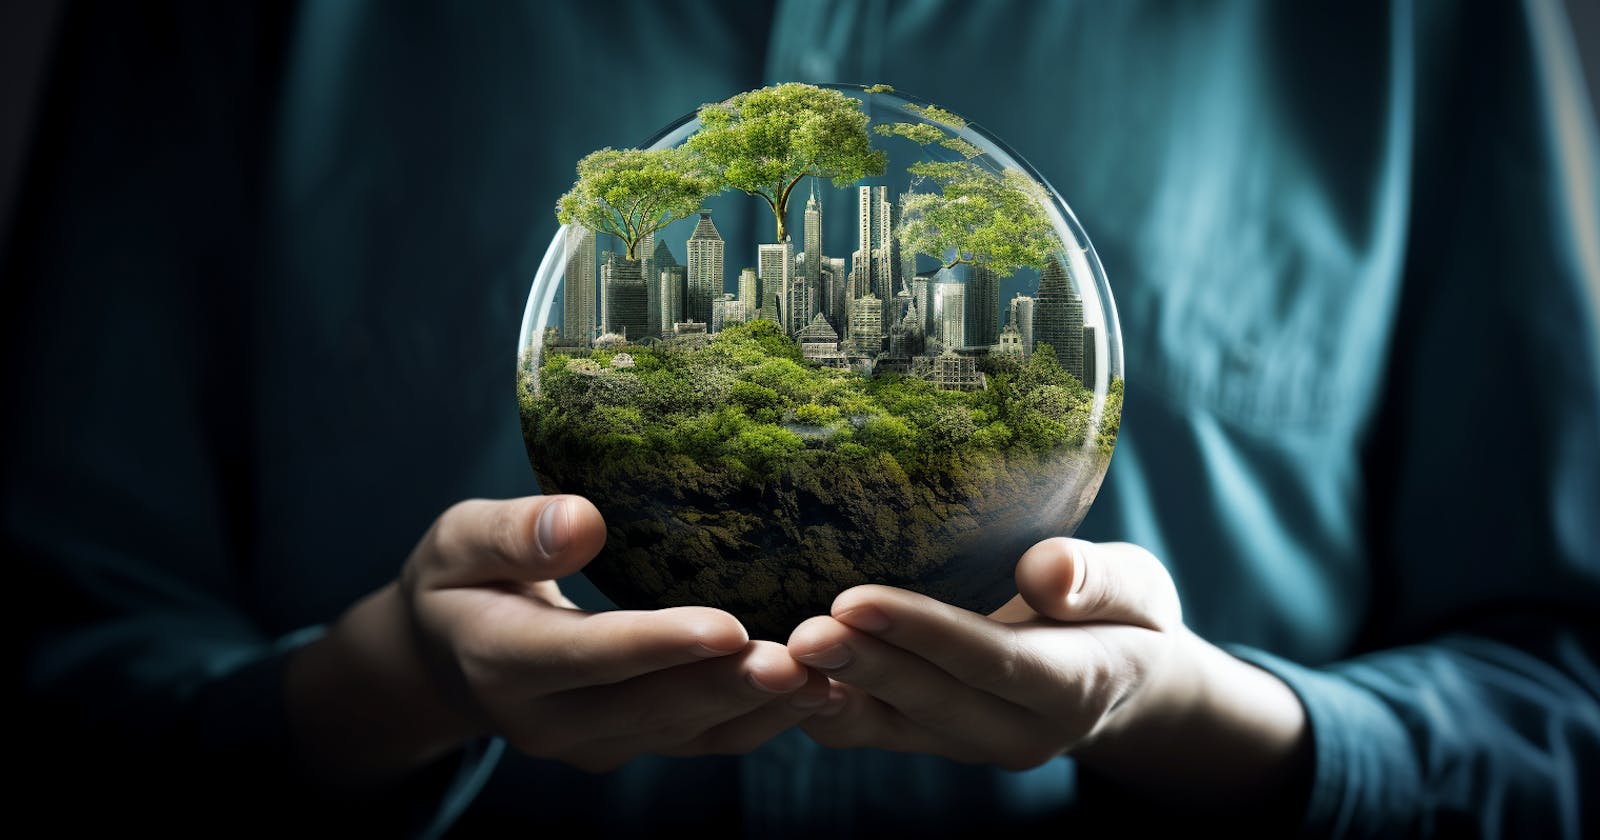 7 Facts about Sustainability Everyone Should Know